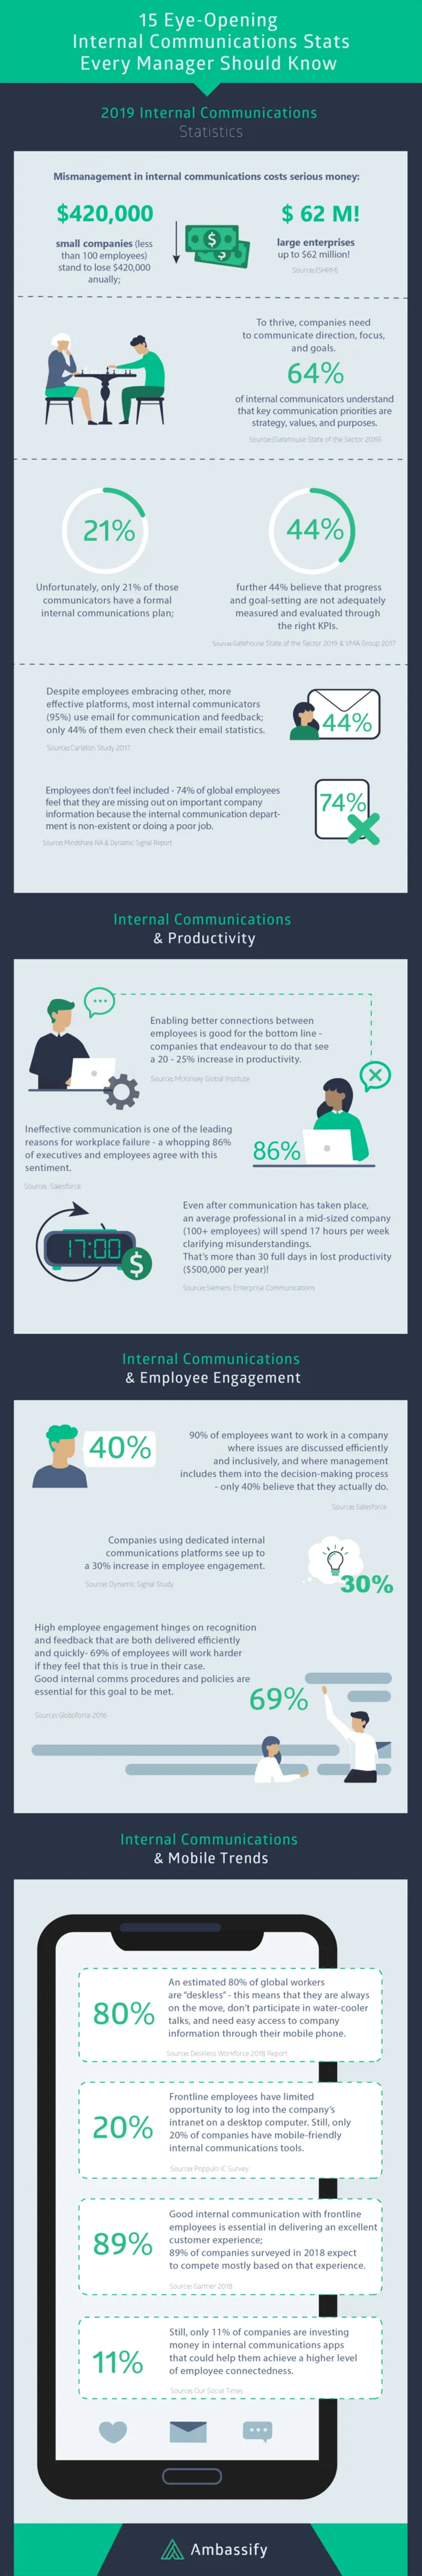 15 eye-opening statistics about internal communications that every manager should know